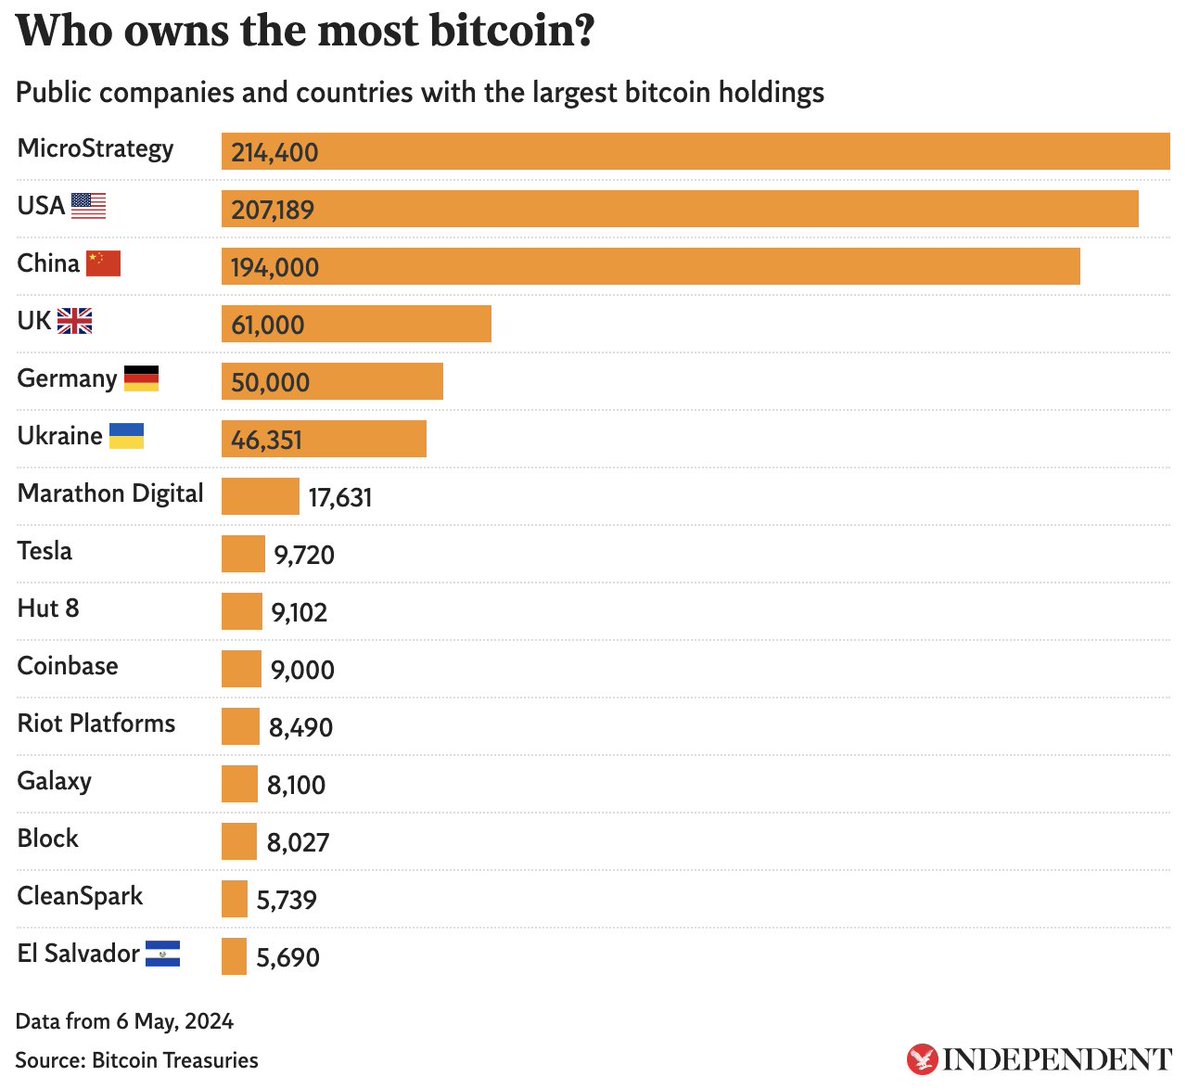 Breaking News : As per @Independent MicroStrategy owns the highest numbers of #Bitcoin
#cryptopiannews #BTC #microstrategy #michaelsaylor #crypto #blockchainnews #technology #Cryptocurency